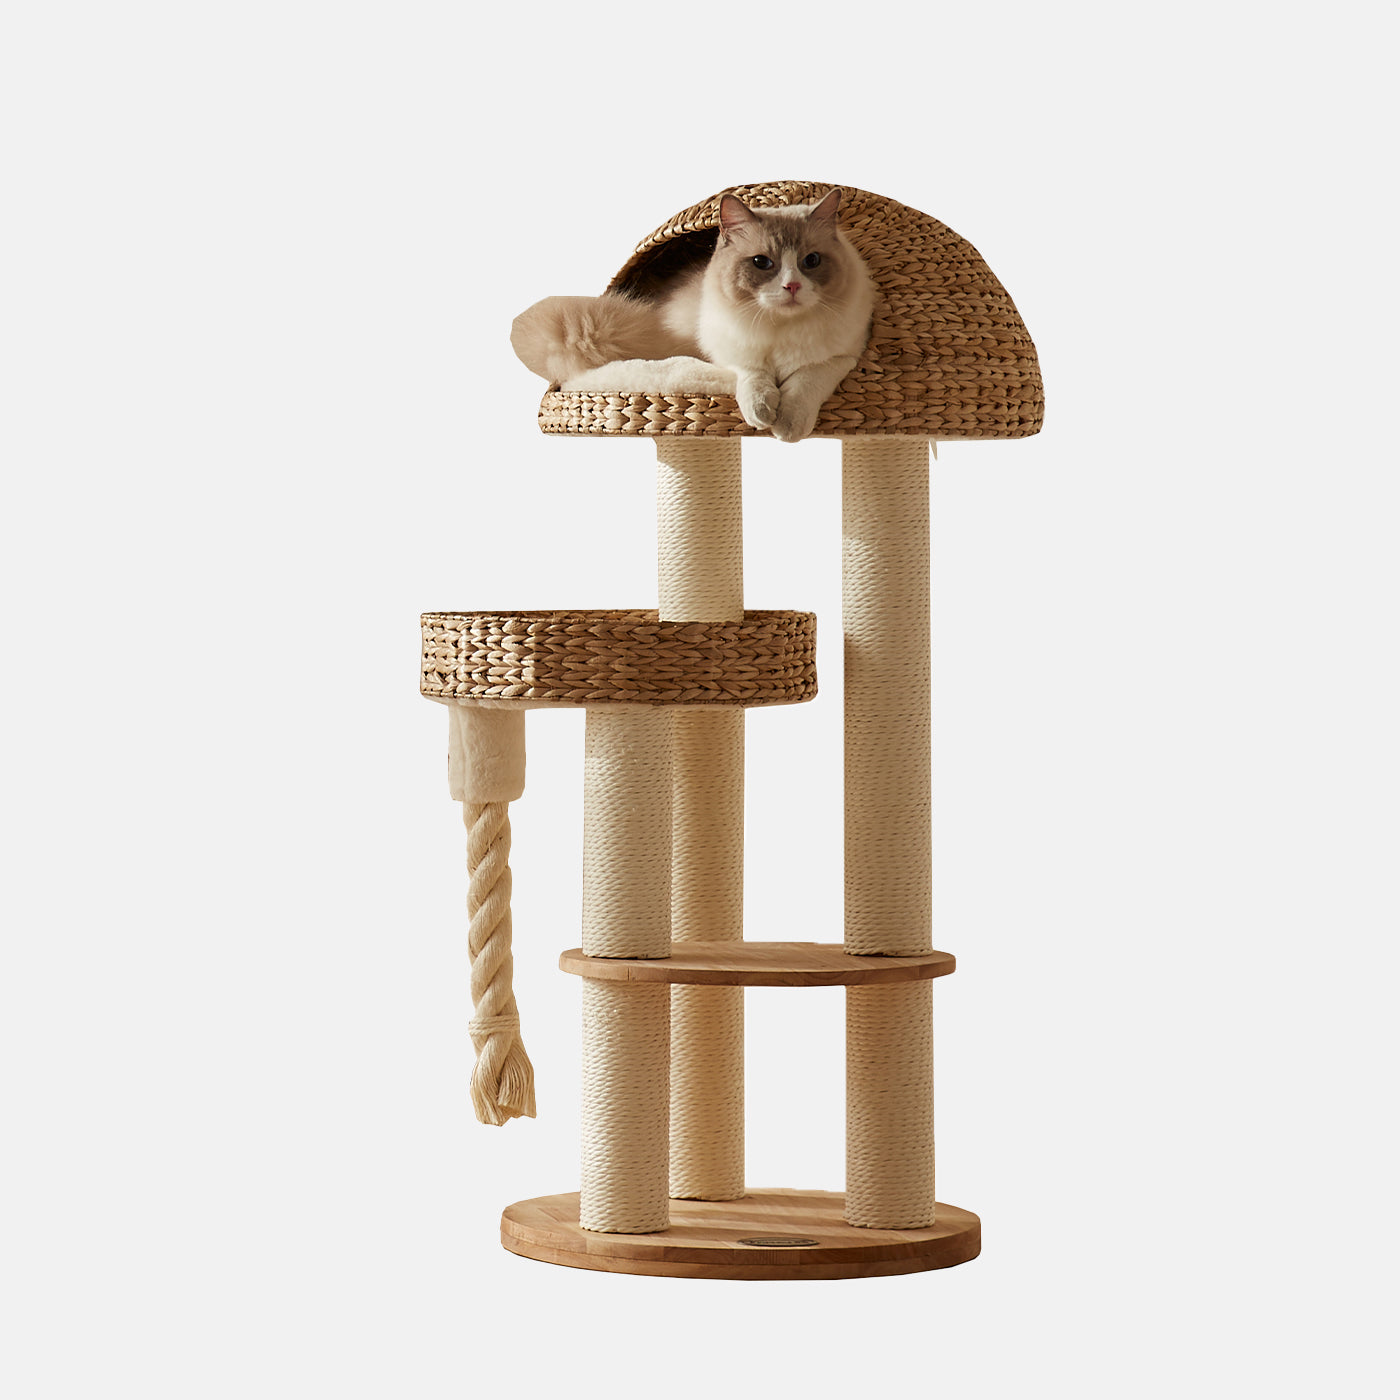 Discover our Luxury Helsinki The Dome Cat Tree. The Perfect Cat Tree For The Ultimate Cat Fun! Featuring Three Scratch Posts, Complete With A Beautiful Wicker & Dome Design! Available Now at Lords & Labradors